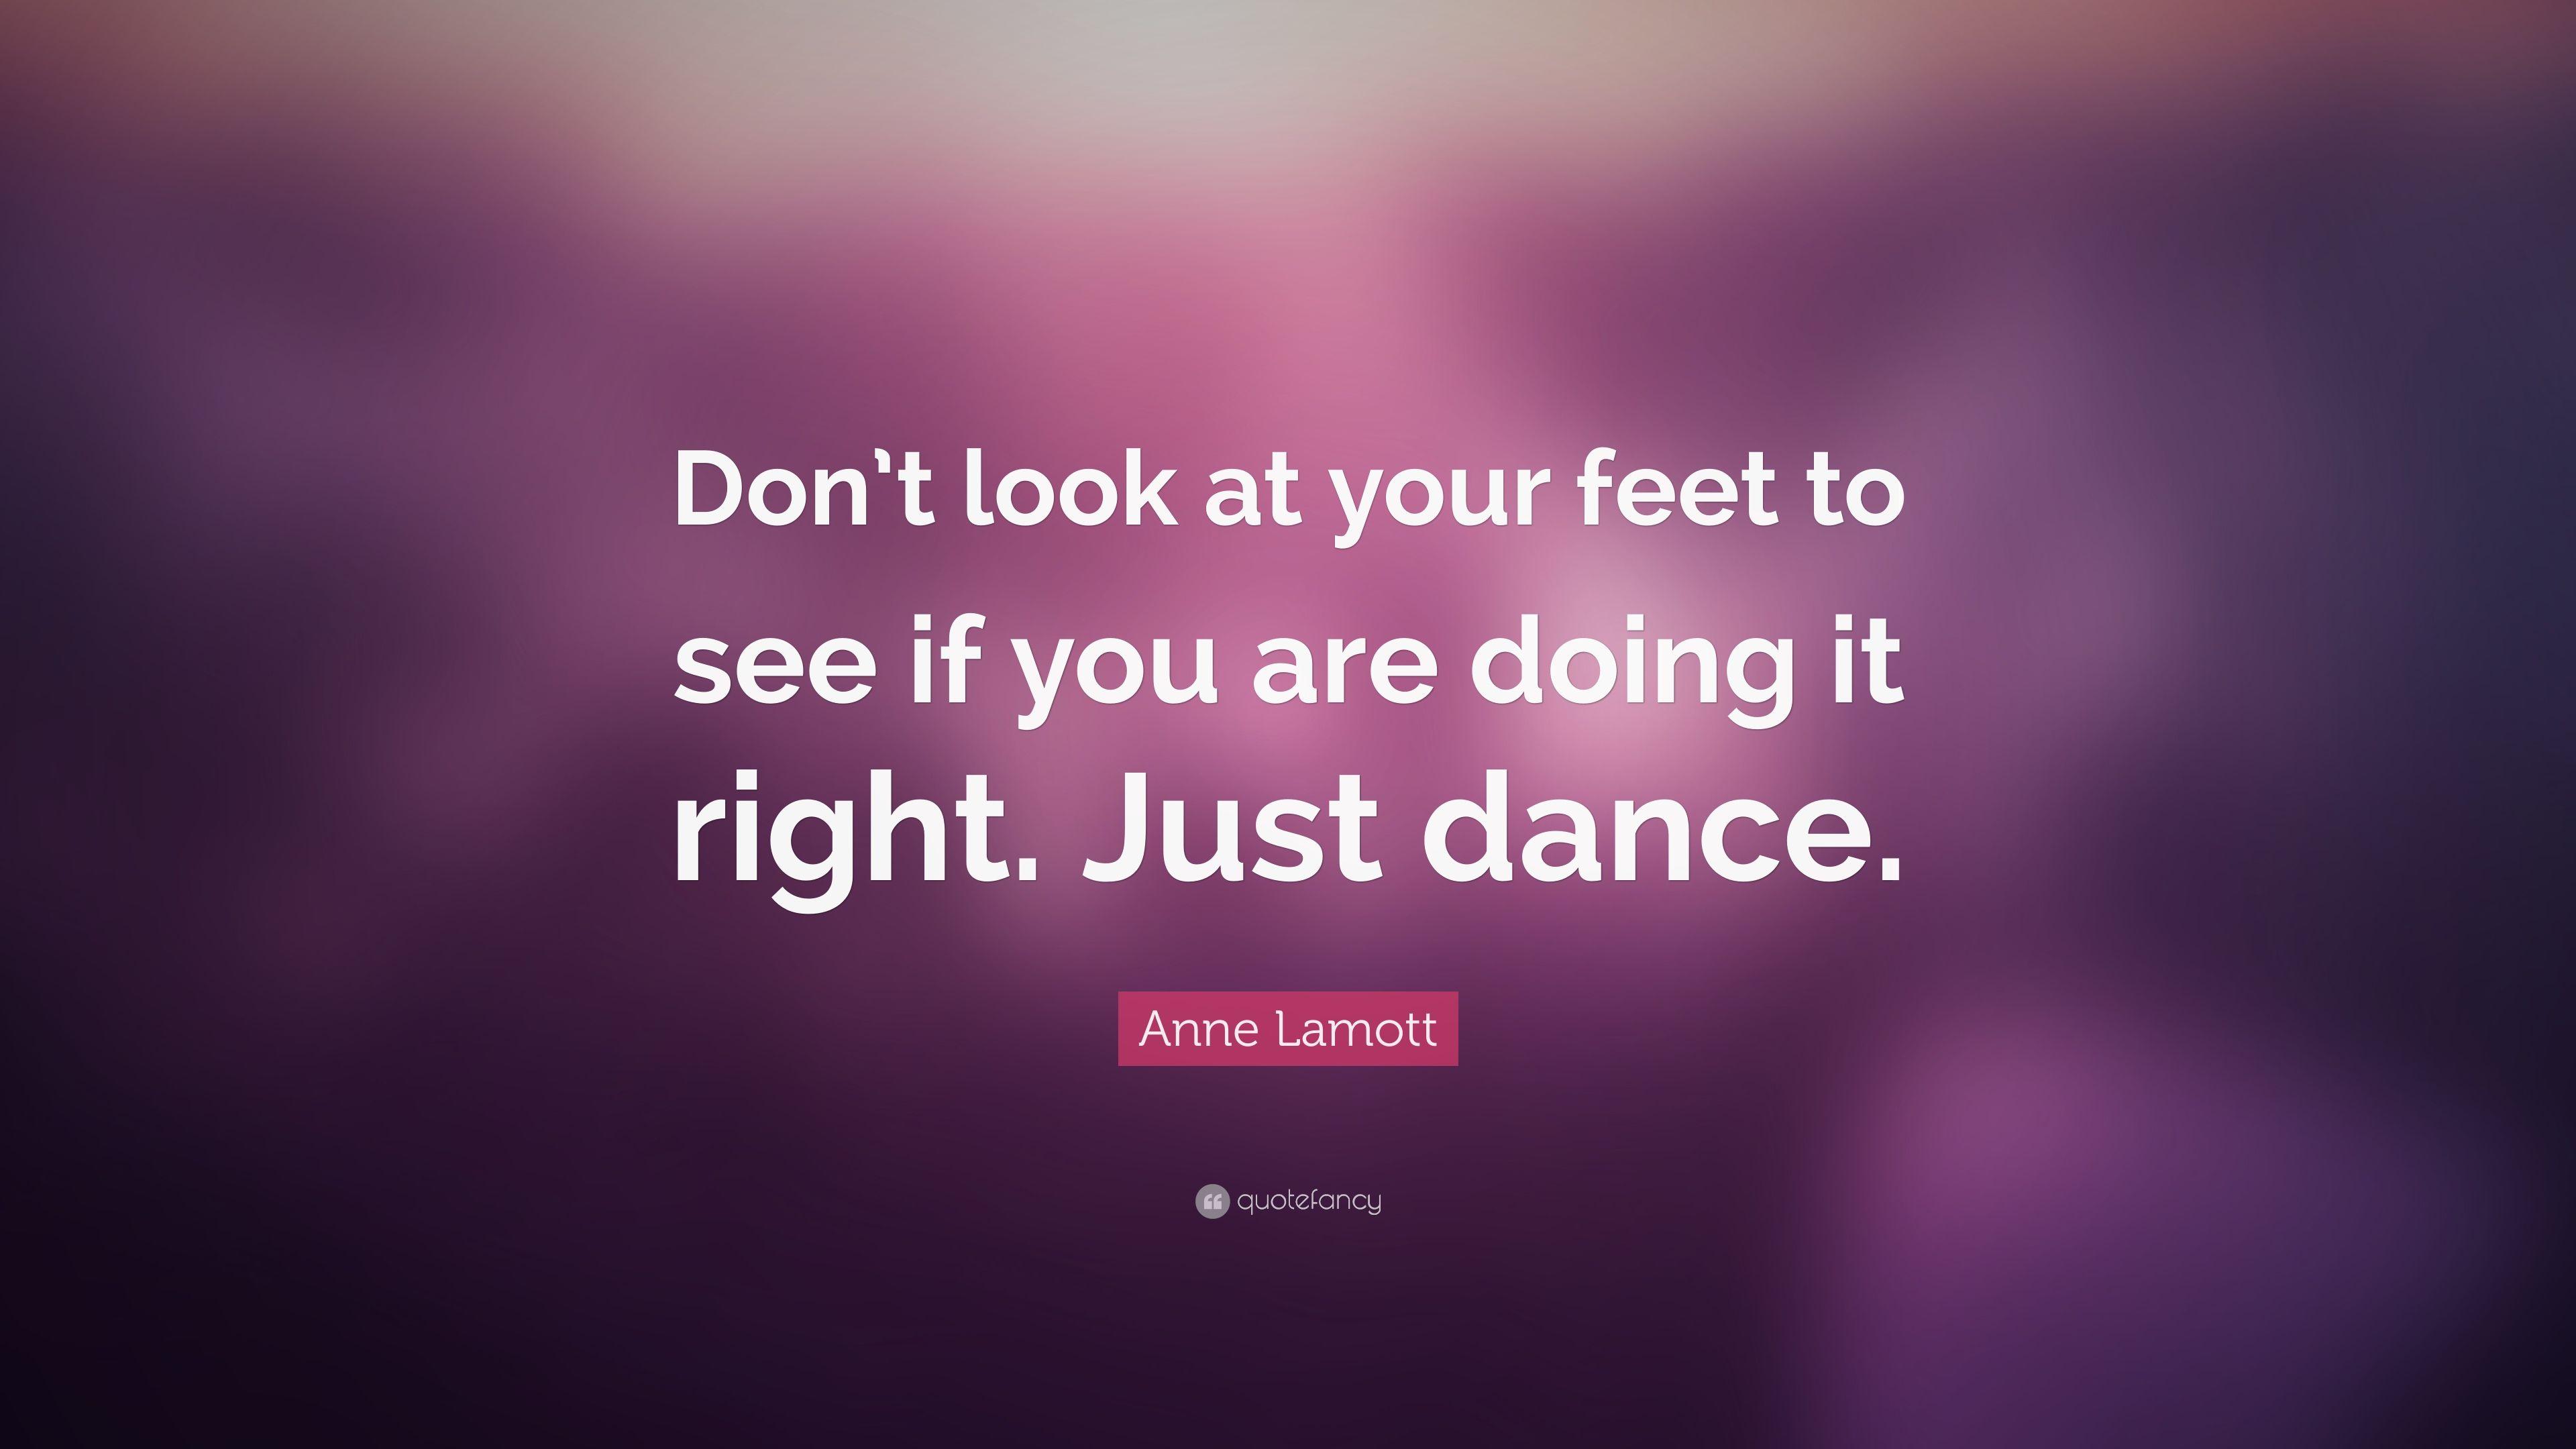 Anne Lamott Quote: “Don't look at your feet to see if you are doing